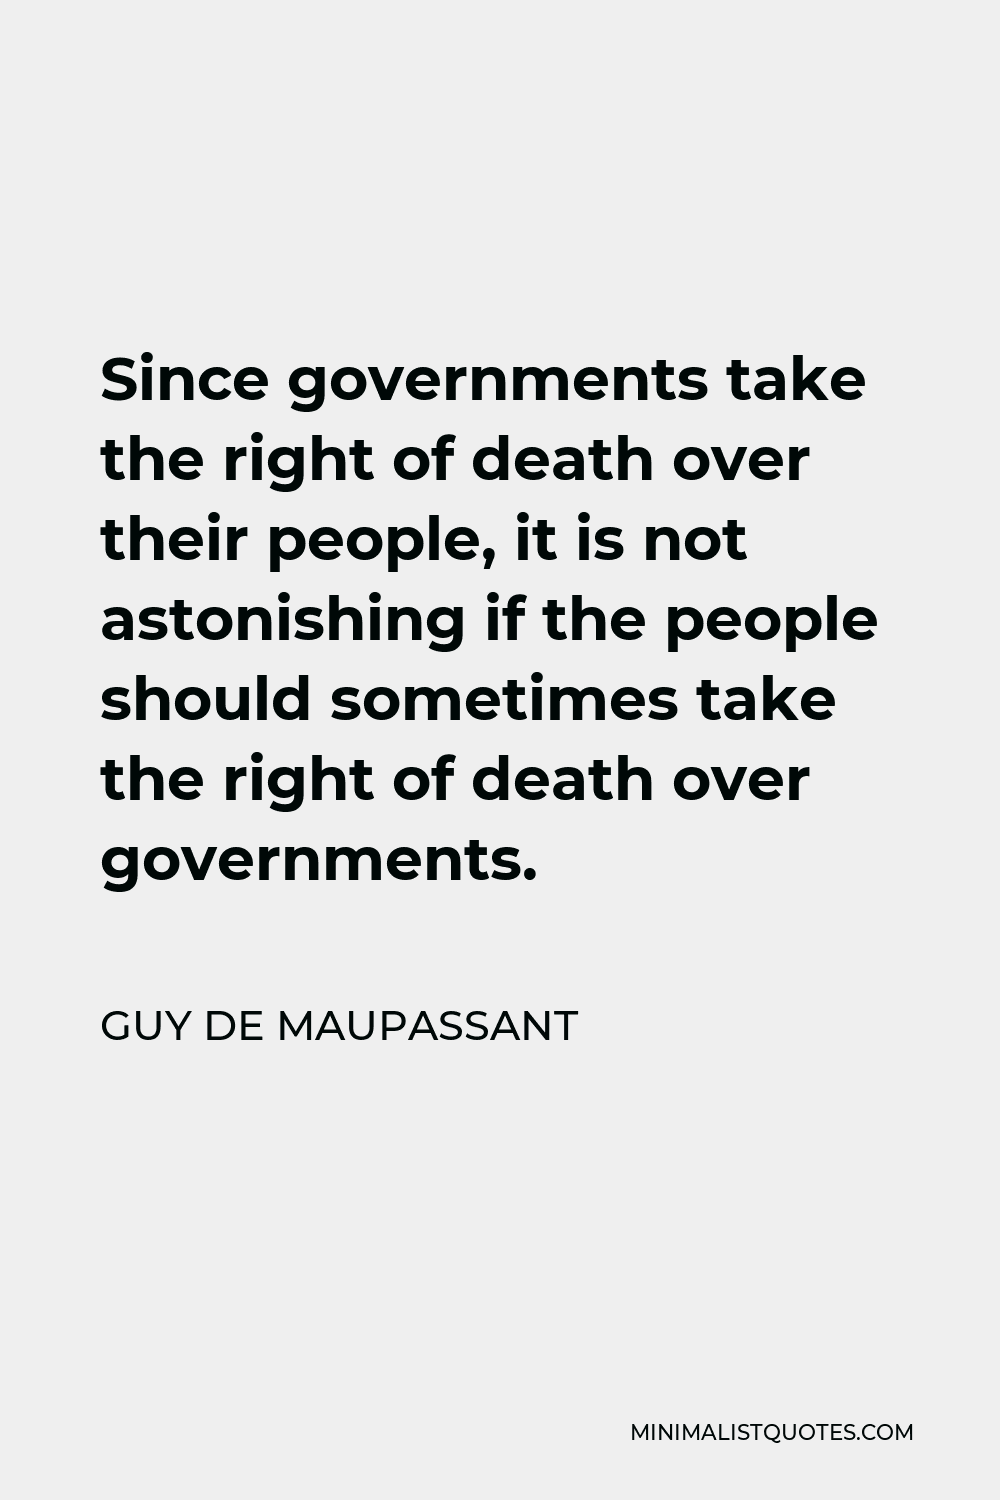 Guy de Maupassant Quote - Since governments take the right of death over their people, it is not astonishing if the people should sometimes take the right of death over governments.